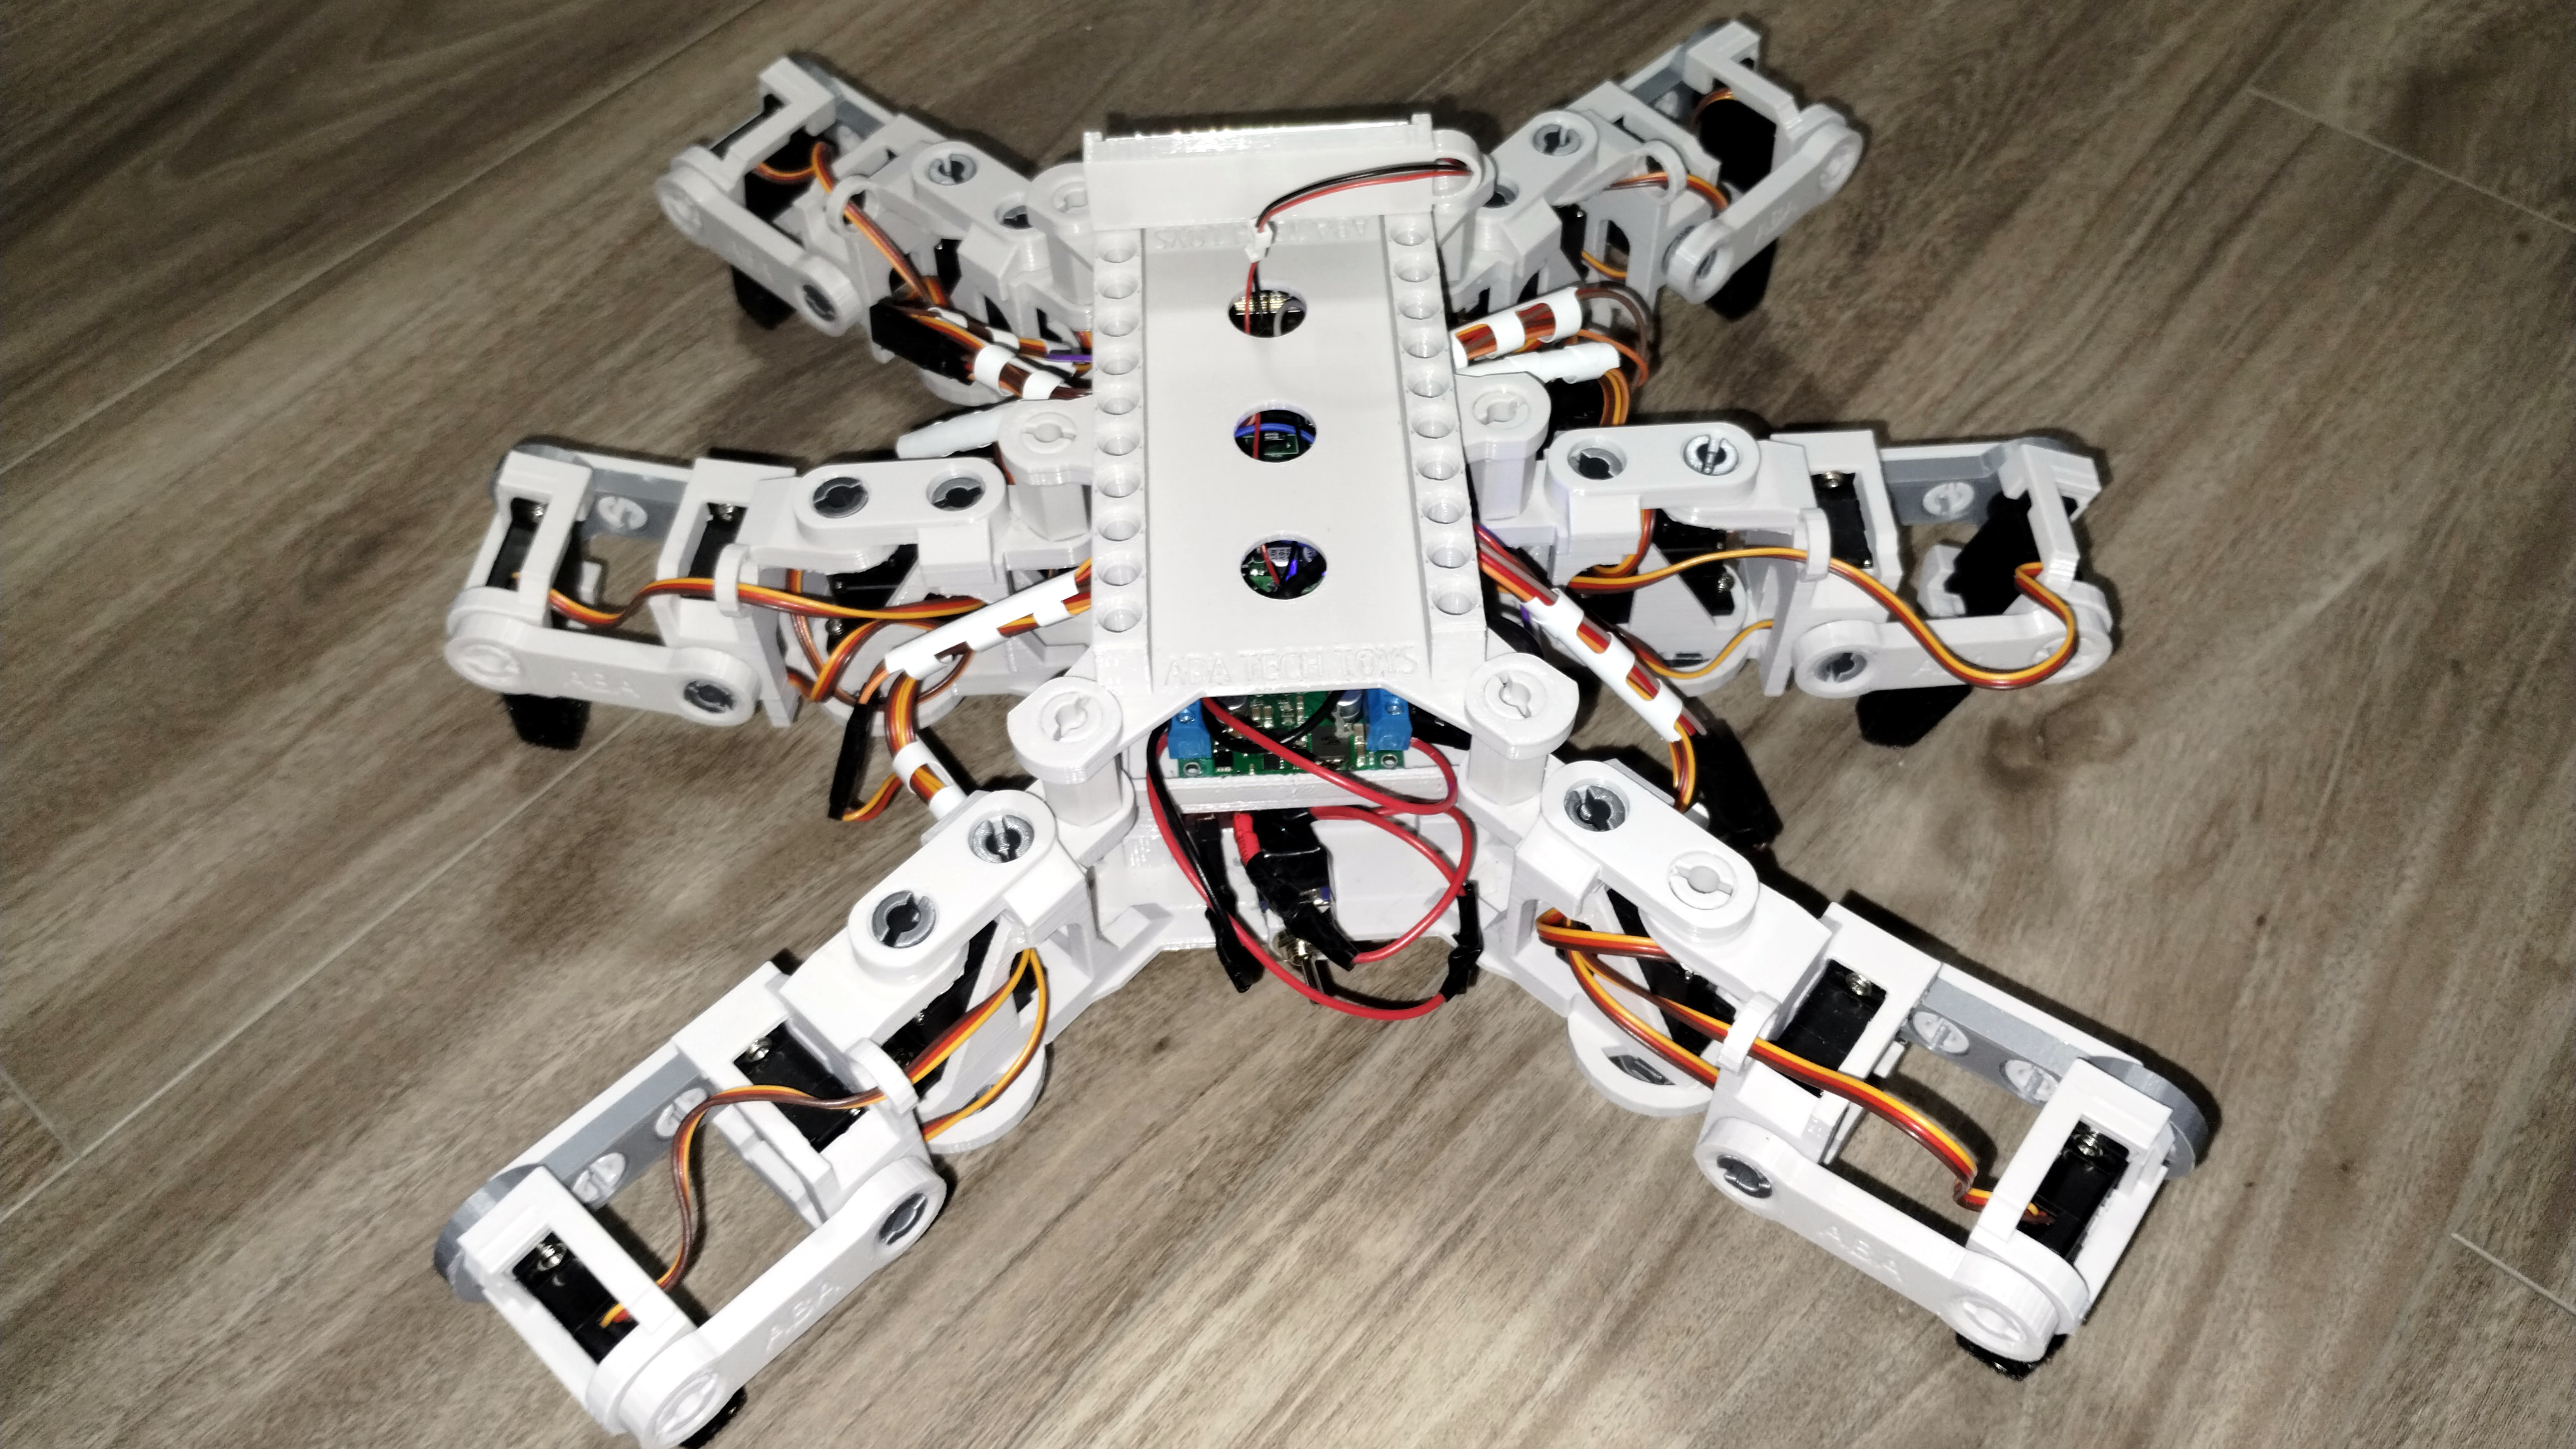 Fire Up The 3D Printer and Build Yourself a Spiderbot